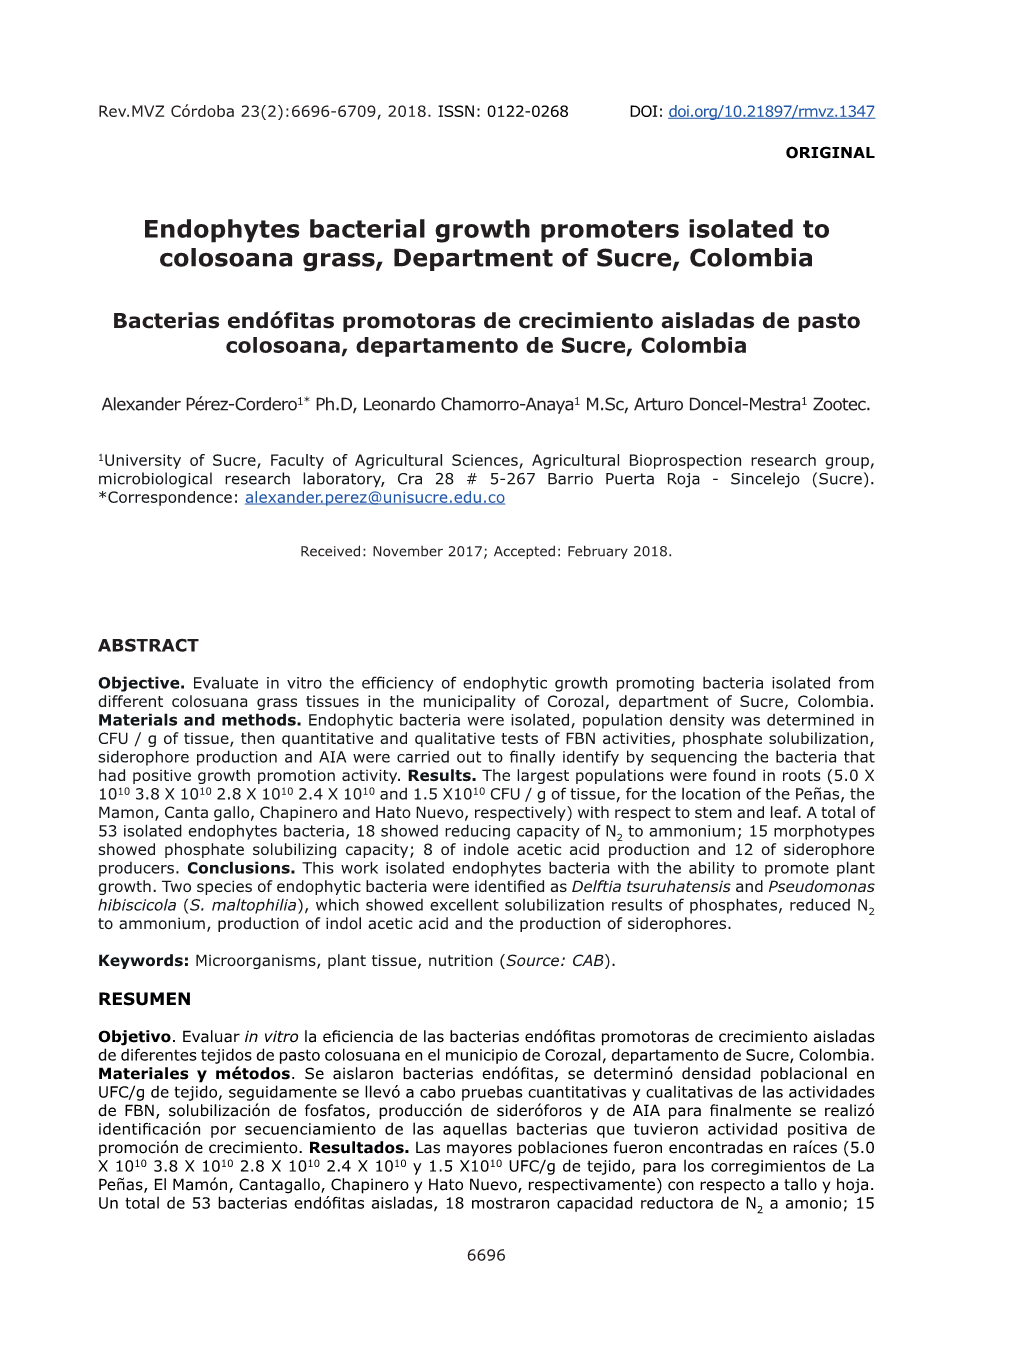 Endophytes Bacterial Growth Promoters Isolated to Colosoana Grass, Department of Sucre, Colombia